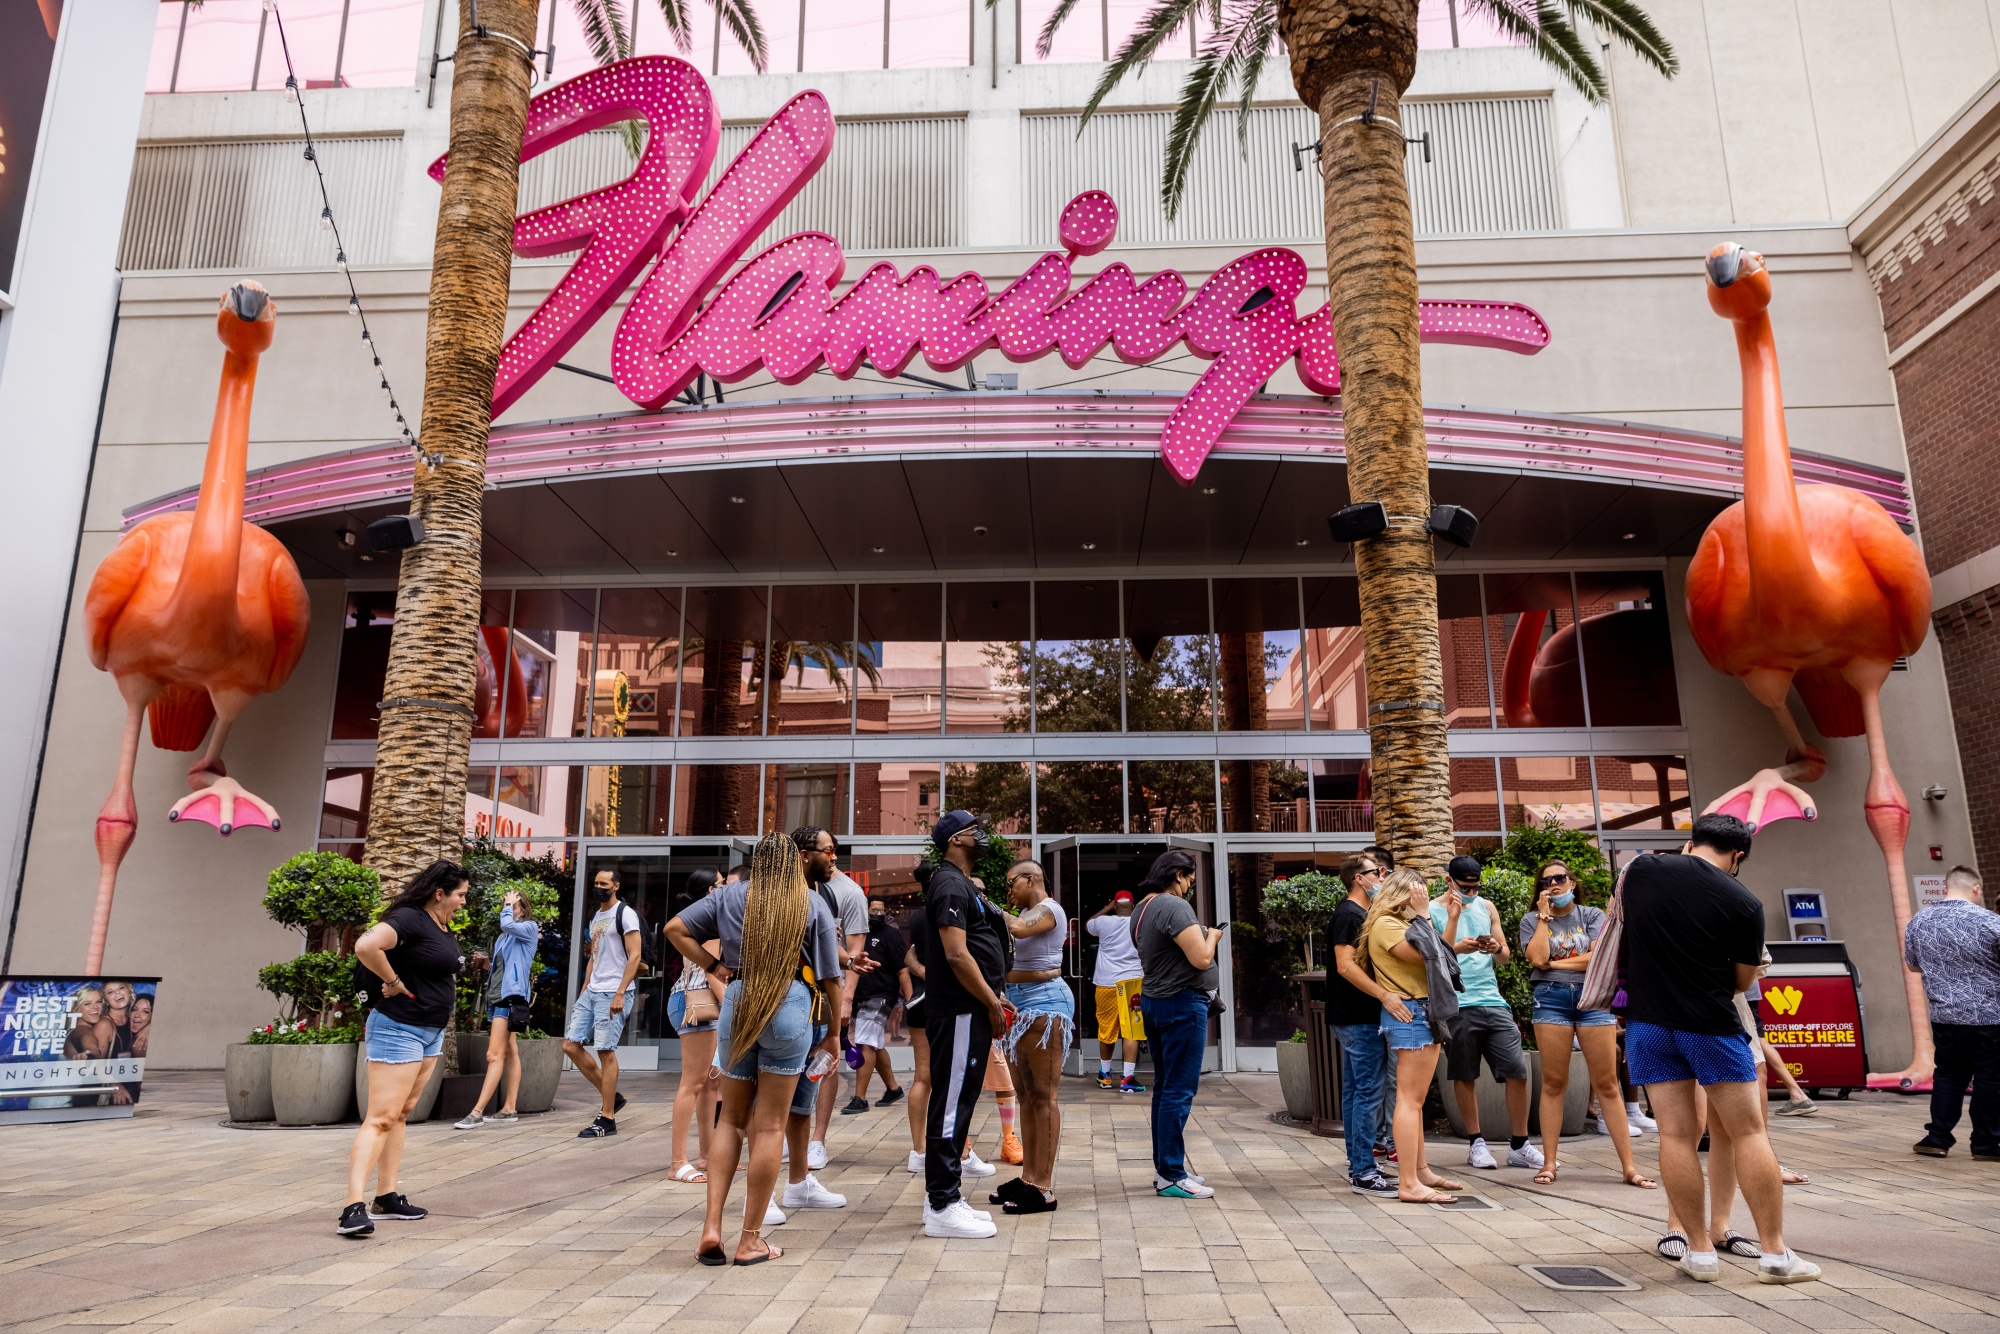 Outside the Flamingo Hotel and Casino in Las Vegas, Nevada, in 2020.